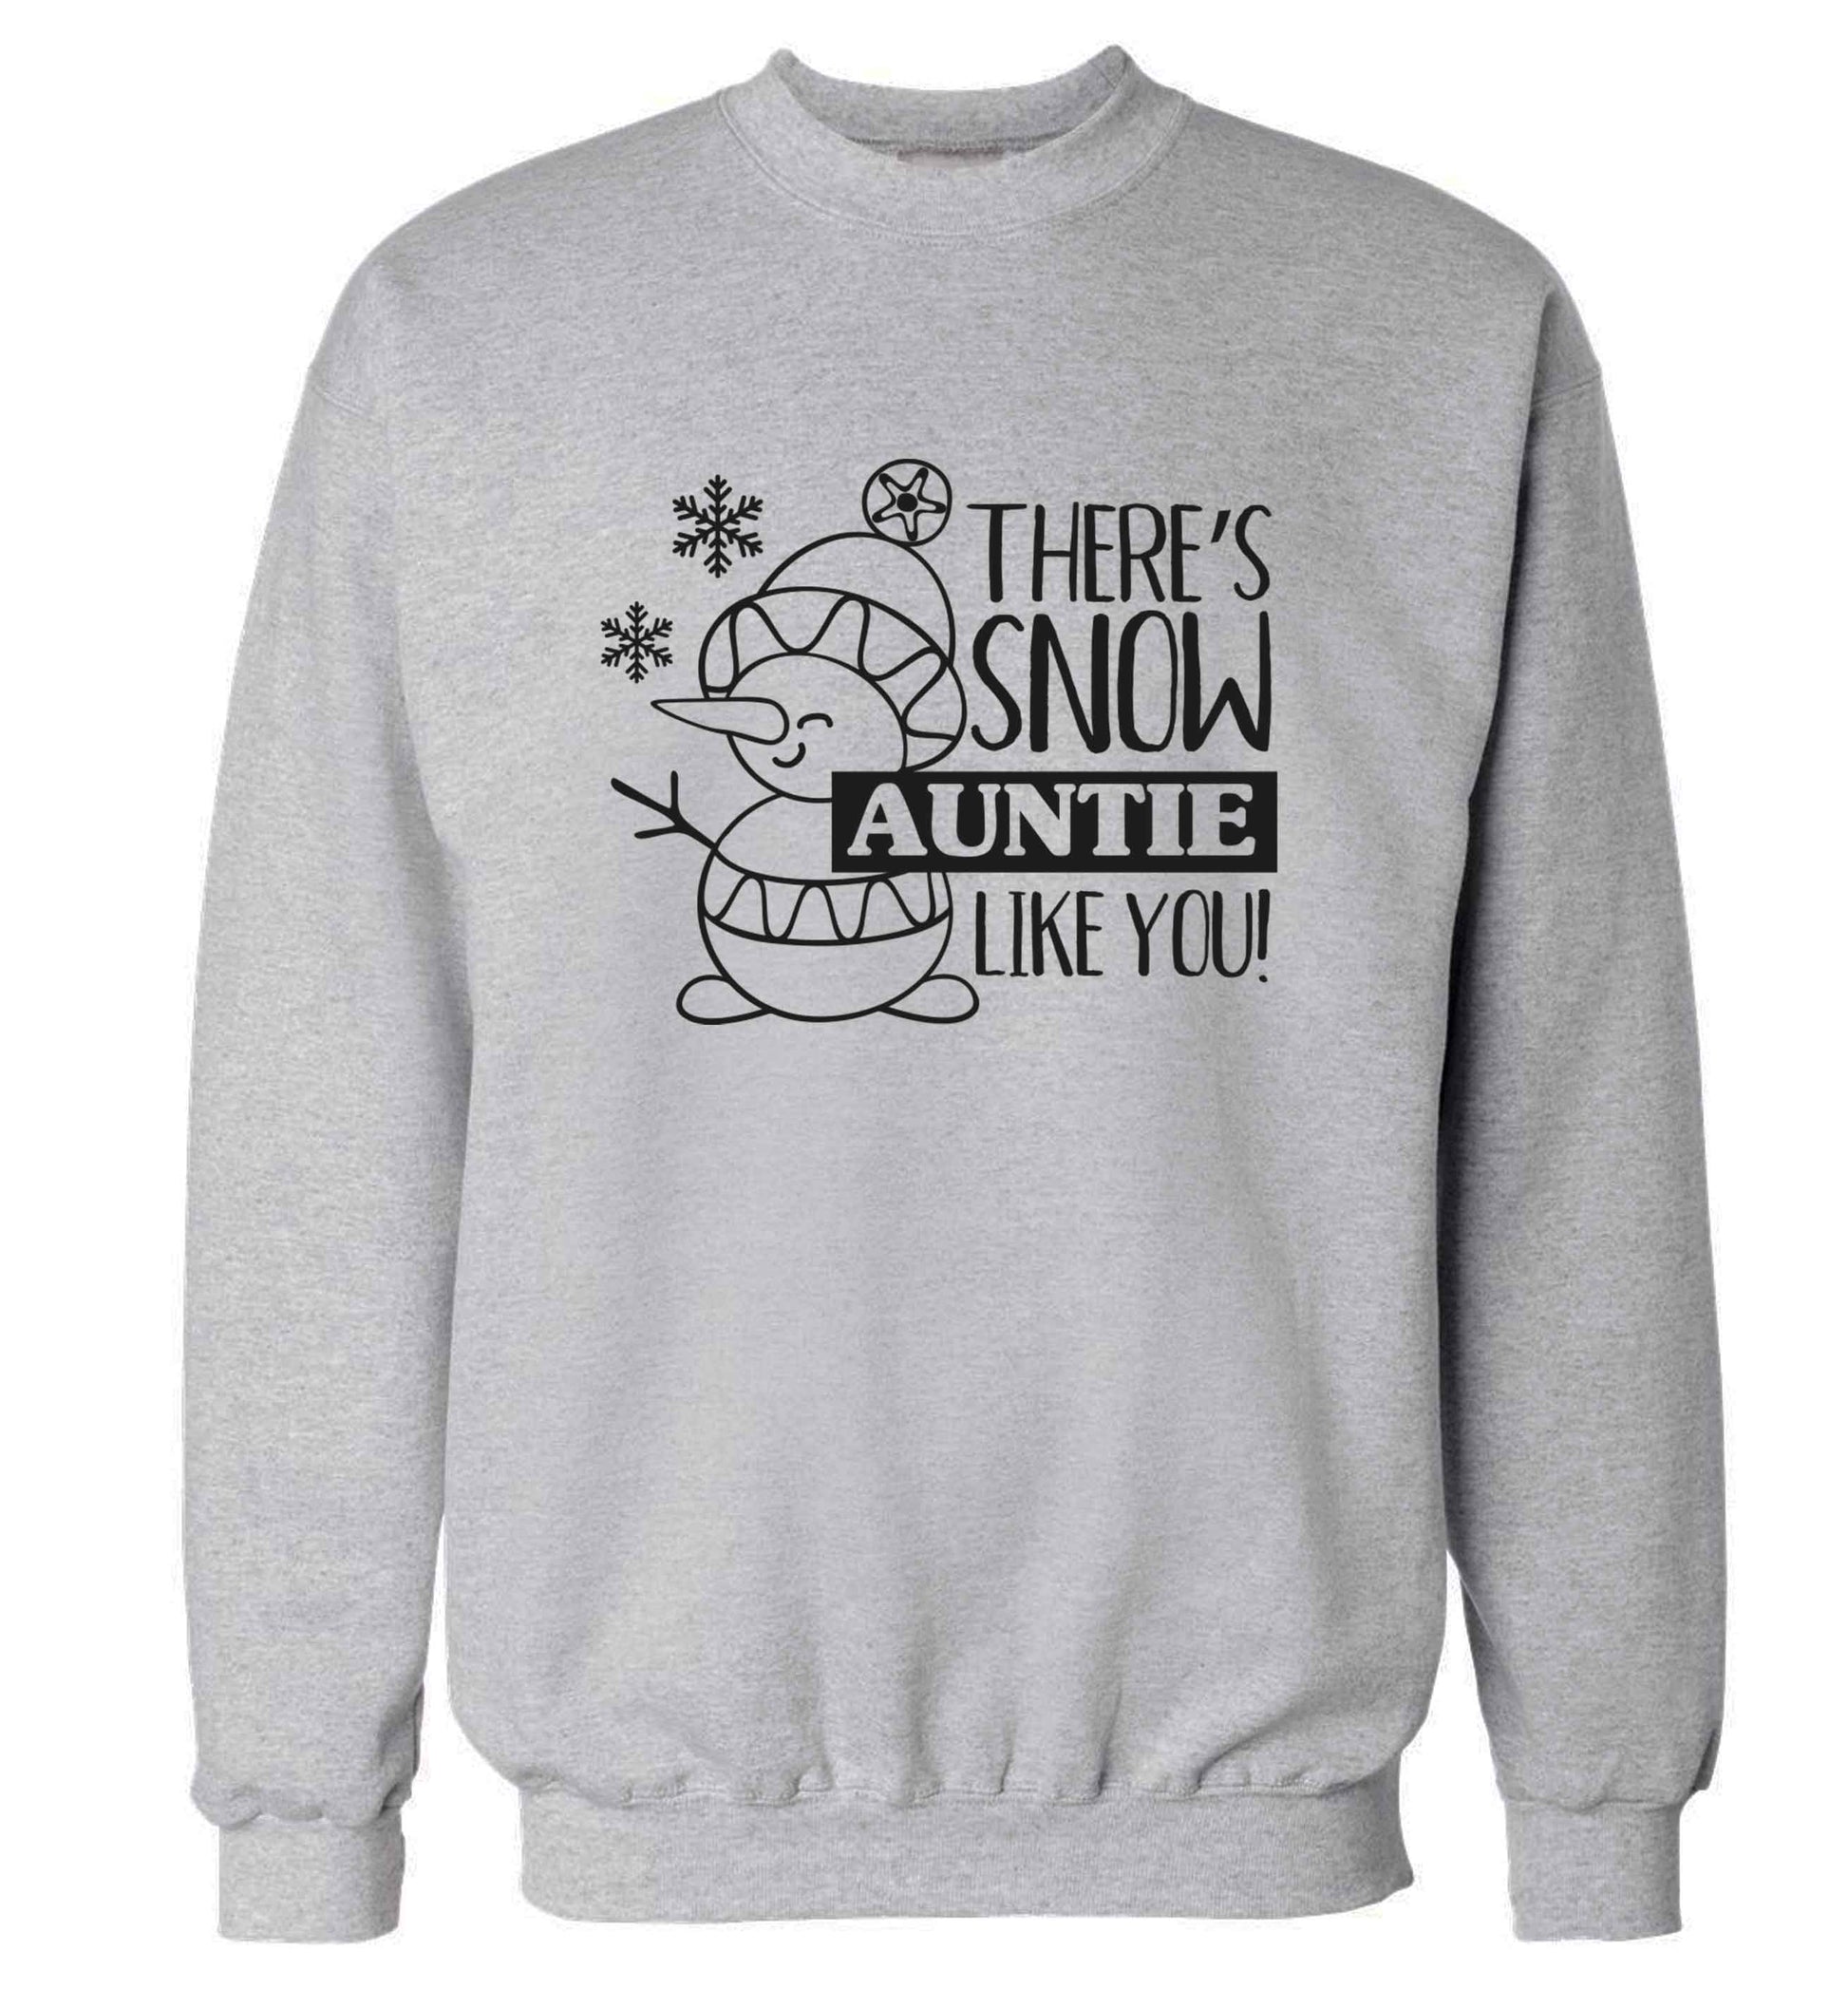 There's snow auntie like you adult's unisex grey sweater 2XL